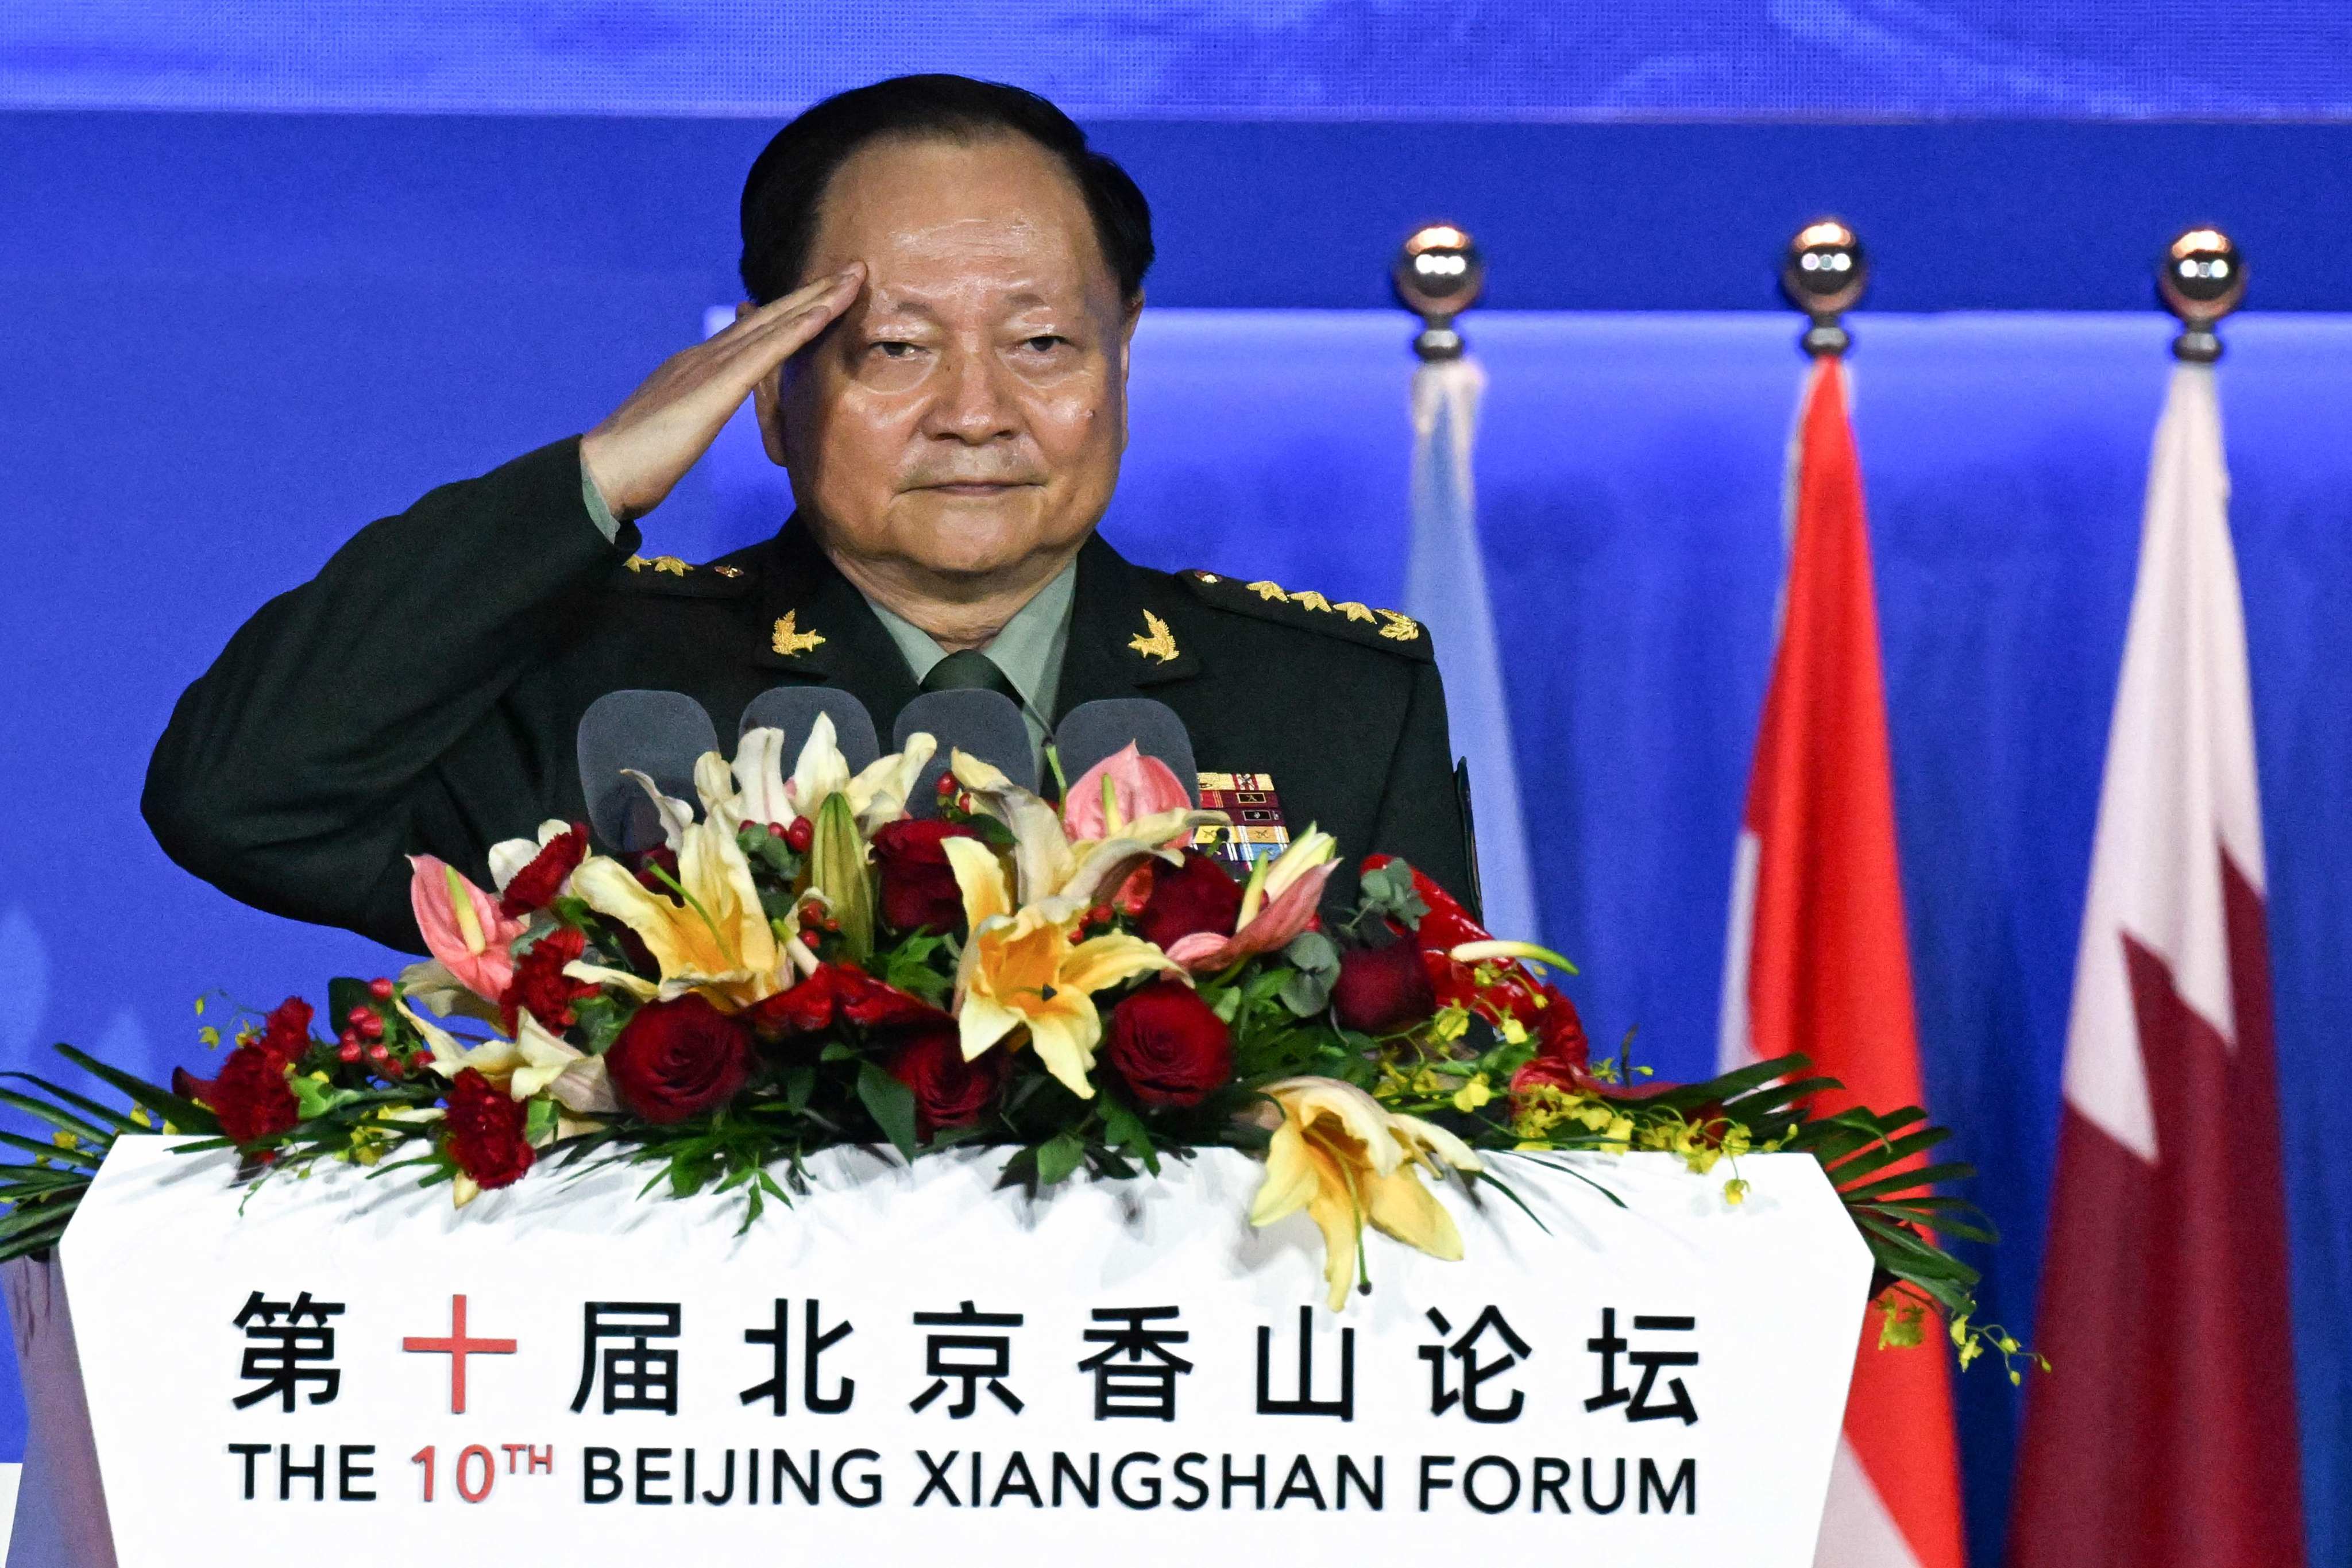 Zhang Youxia, vice-chairman of the CMC, told the forum that Taiwan is the “core of China’s core interests”. Photo: AFP